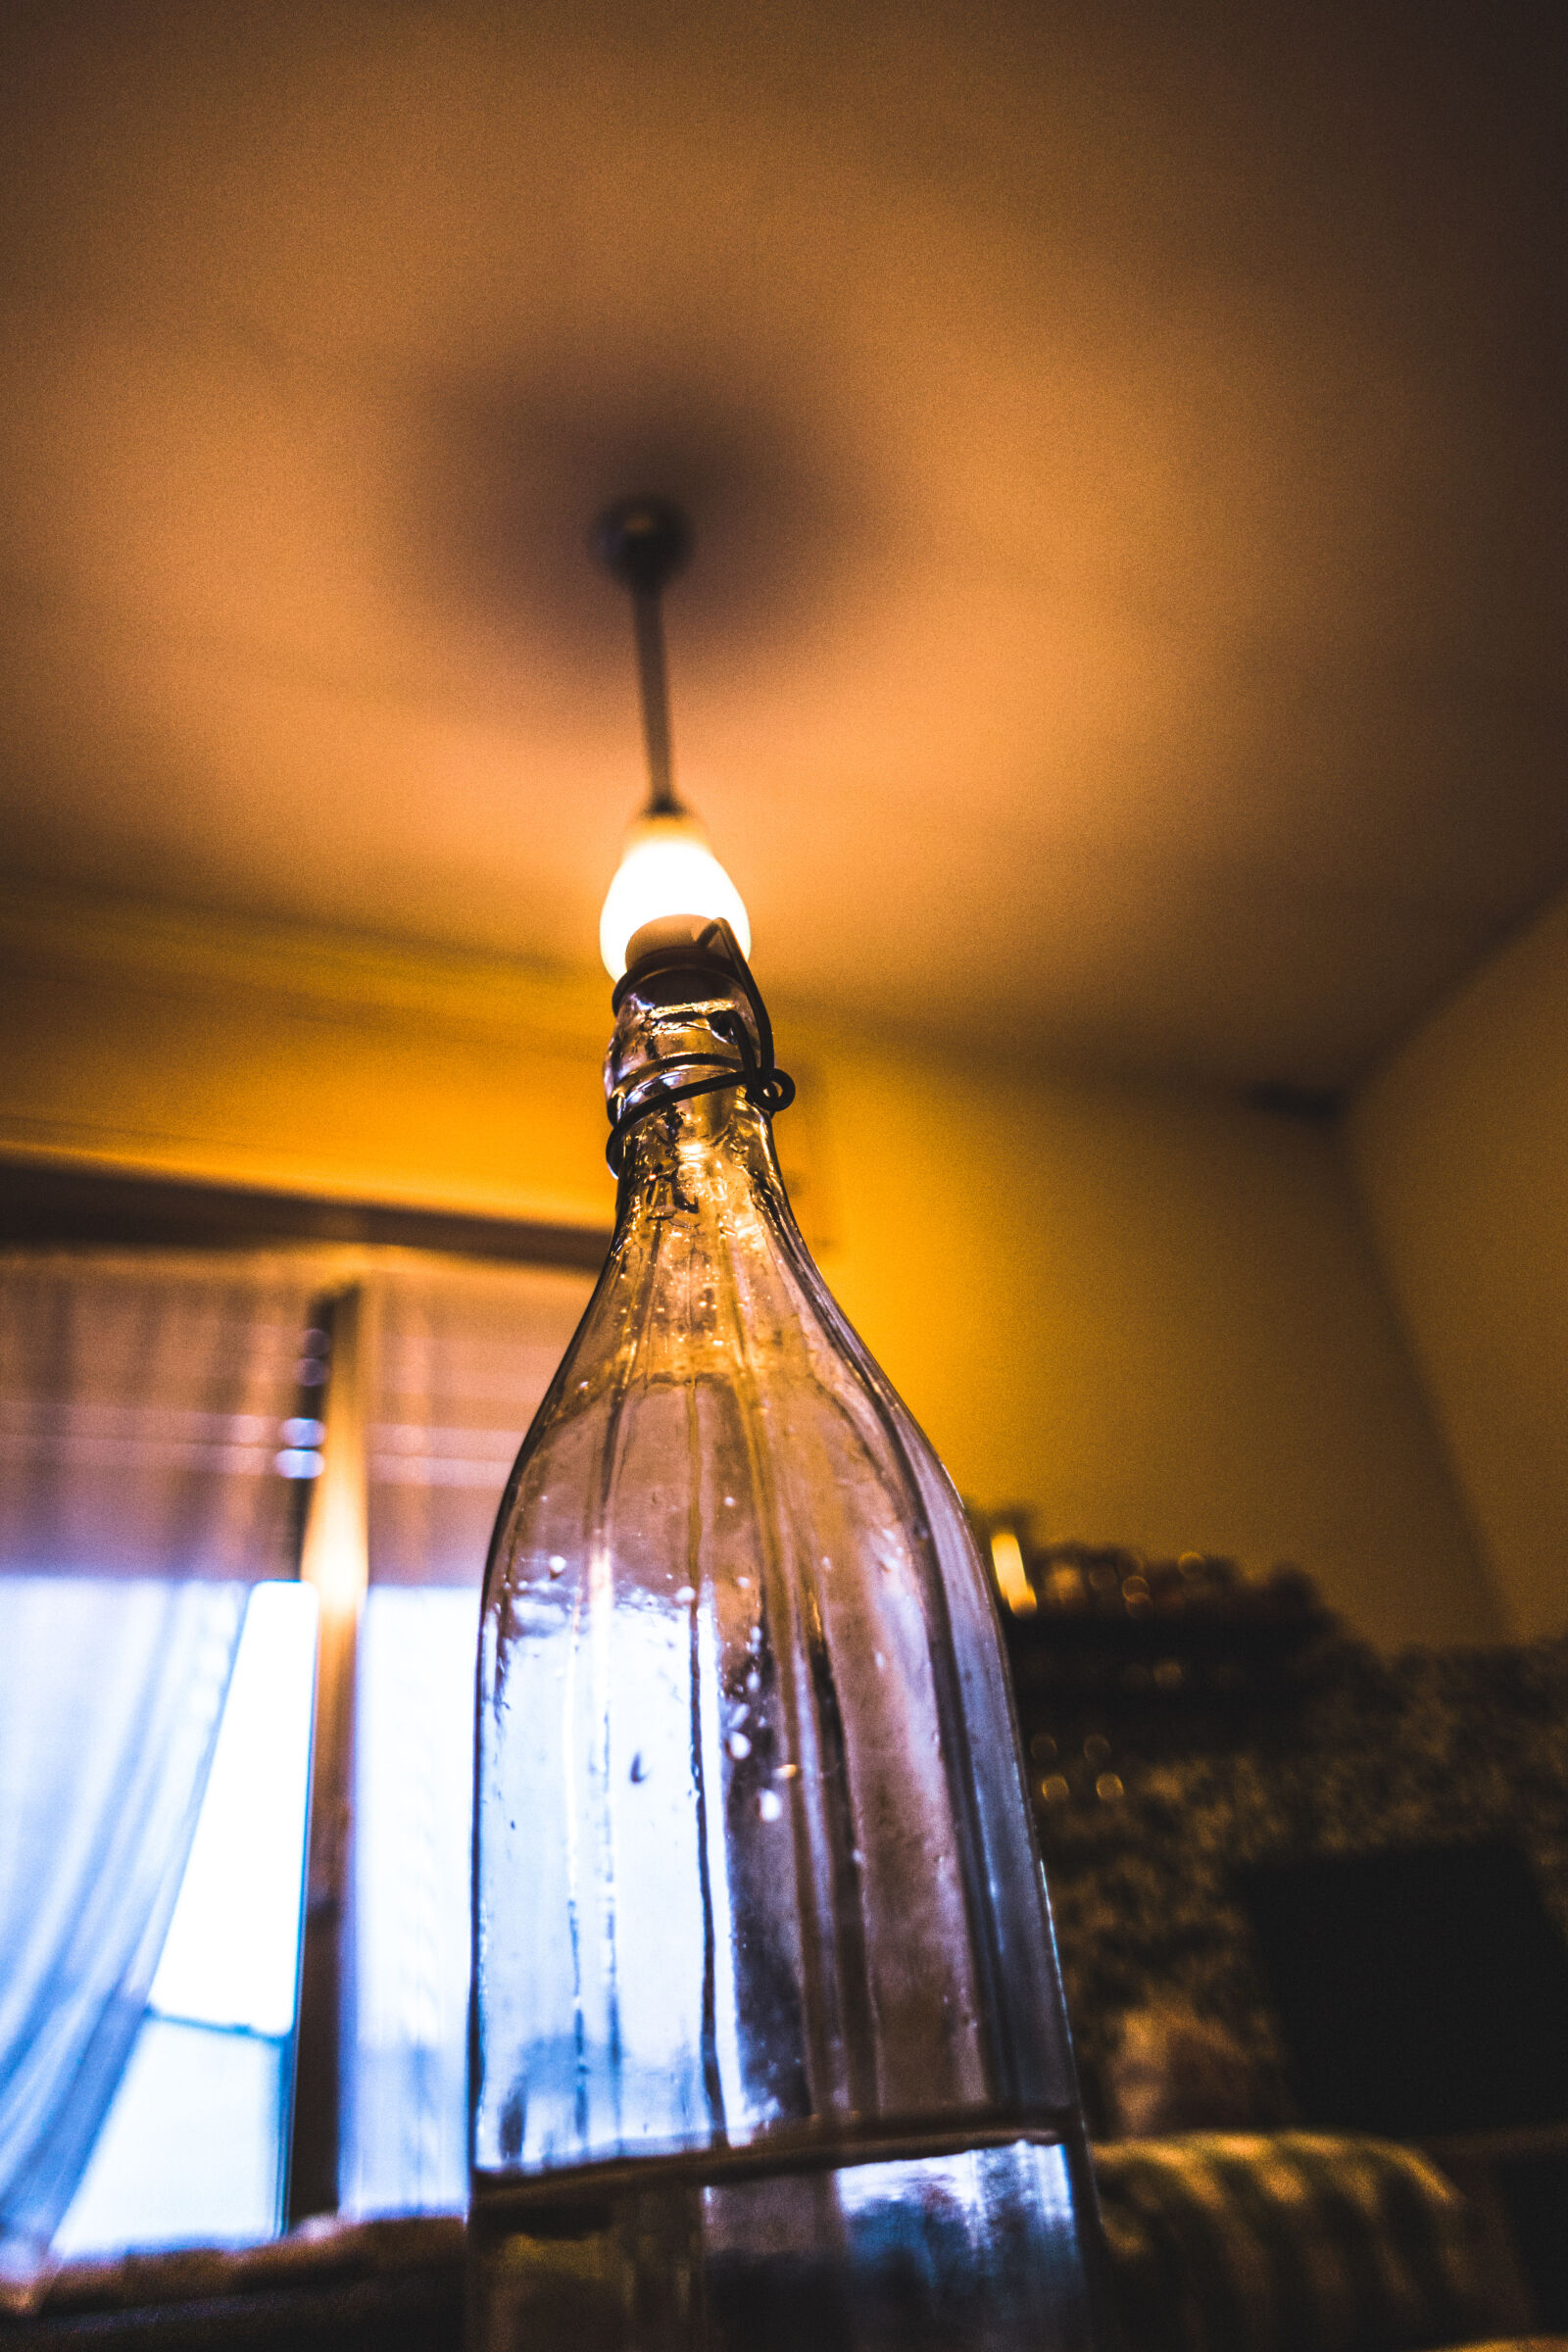 Samsung NX1000 sample photo. Bottle, home, today photography